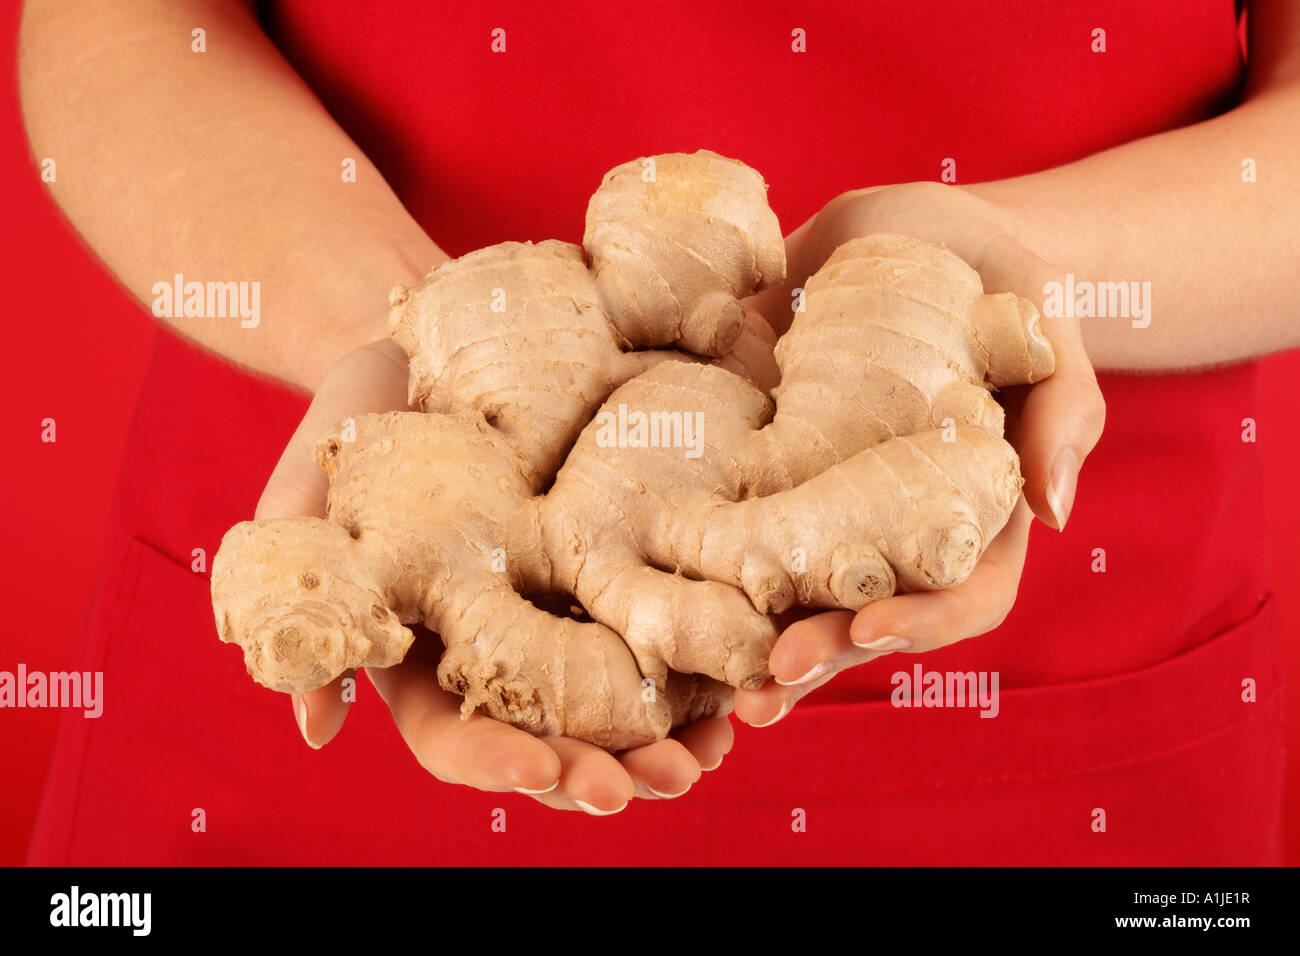 WOMAN HOLDING FRESH GINGER ROOT Stock Photo